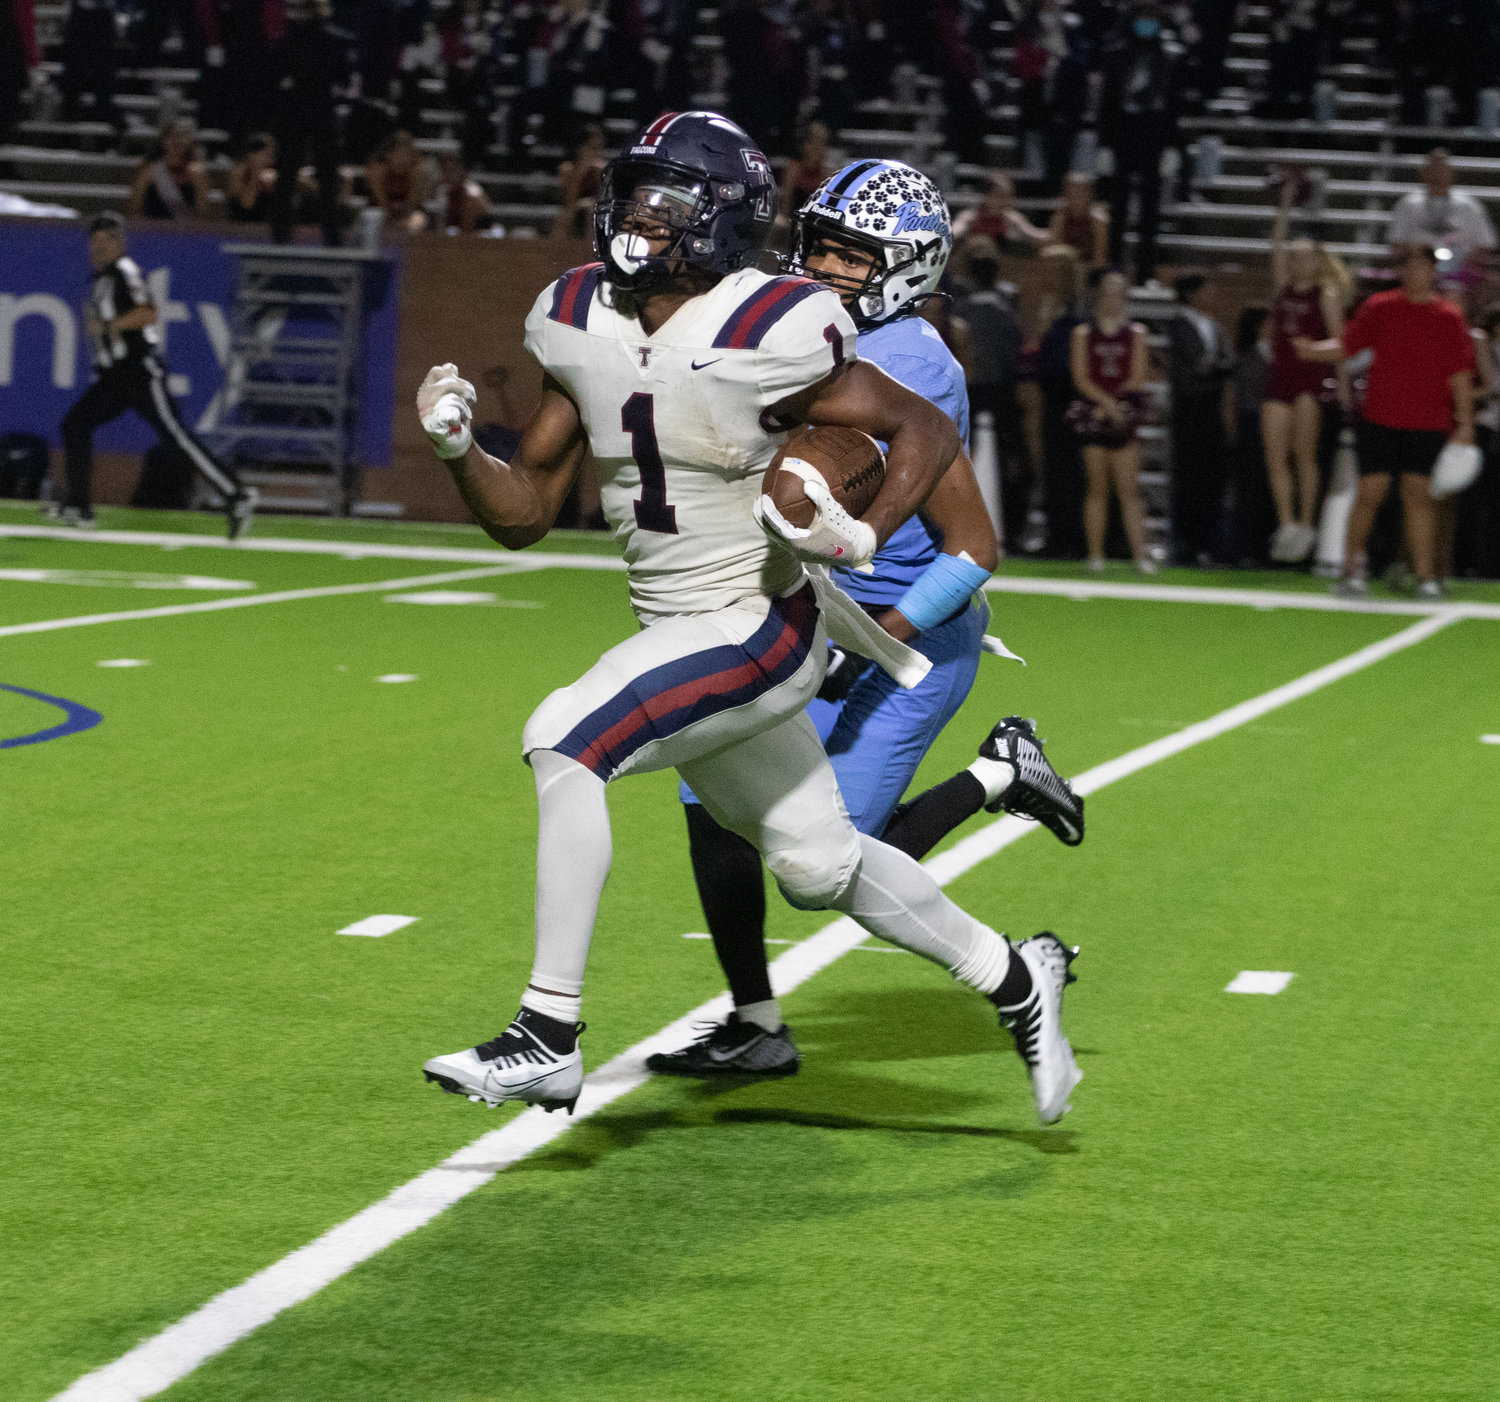 Tompkins' Caleb Komolafe runs in a touchdown during Friday's game between Tompkins and Paetow at Rhodes Stadium.